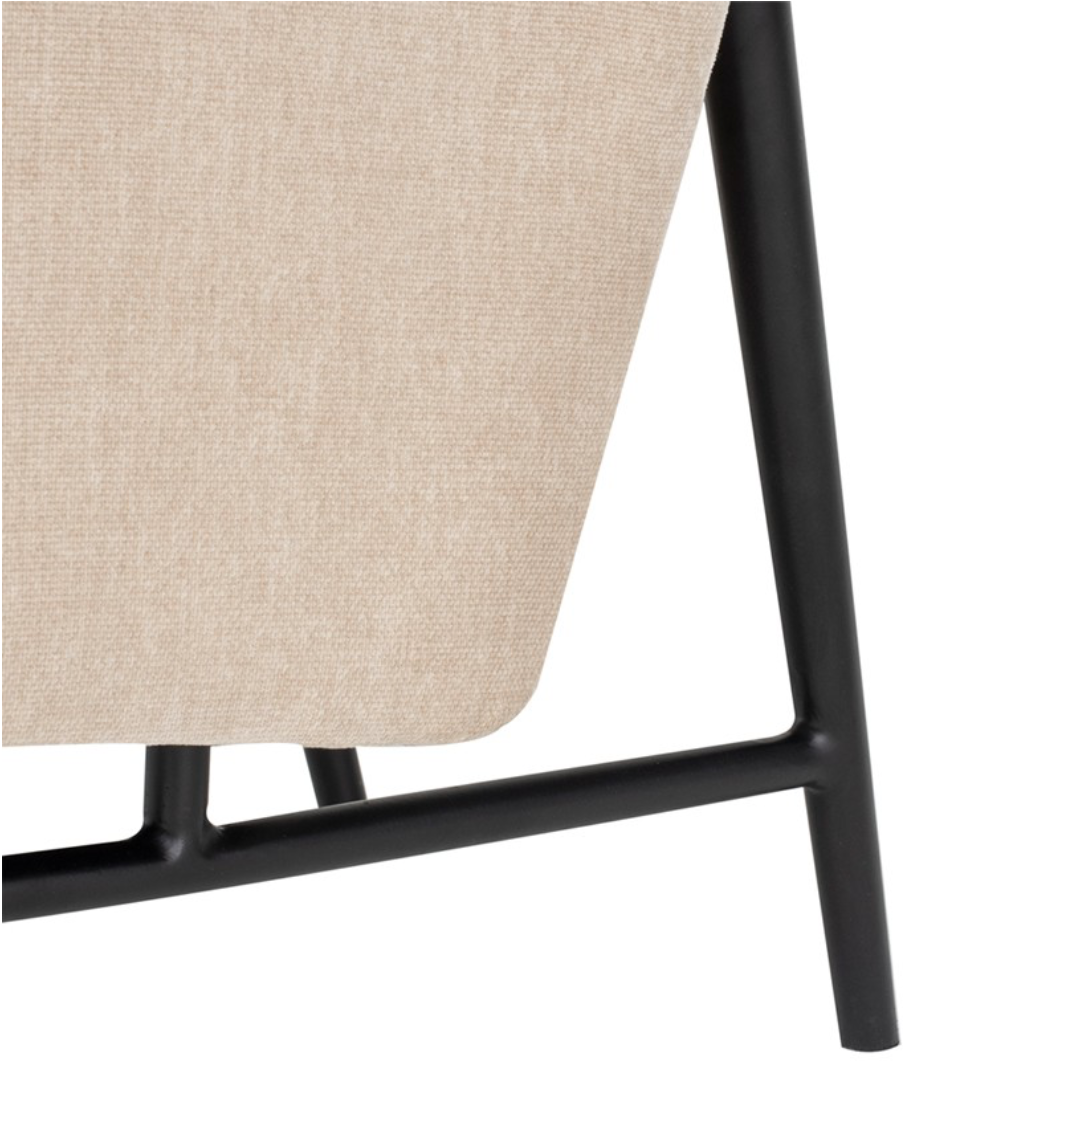 Mathise Almond Occasional Chair